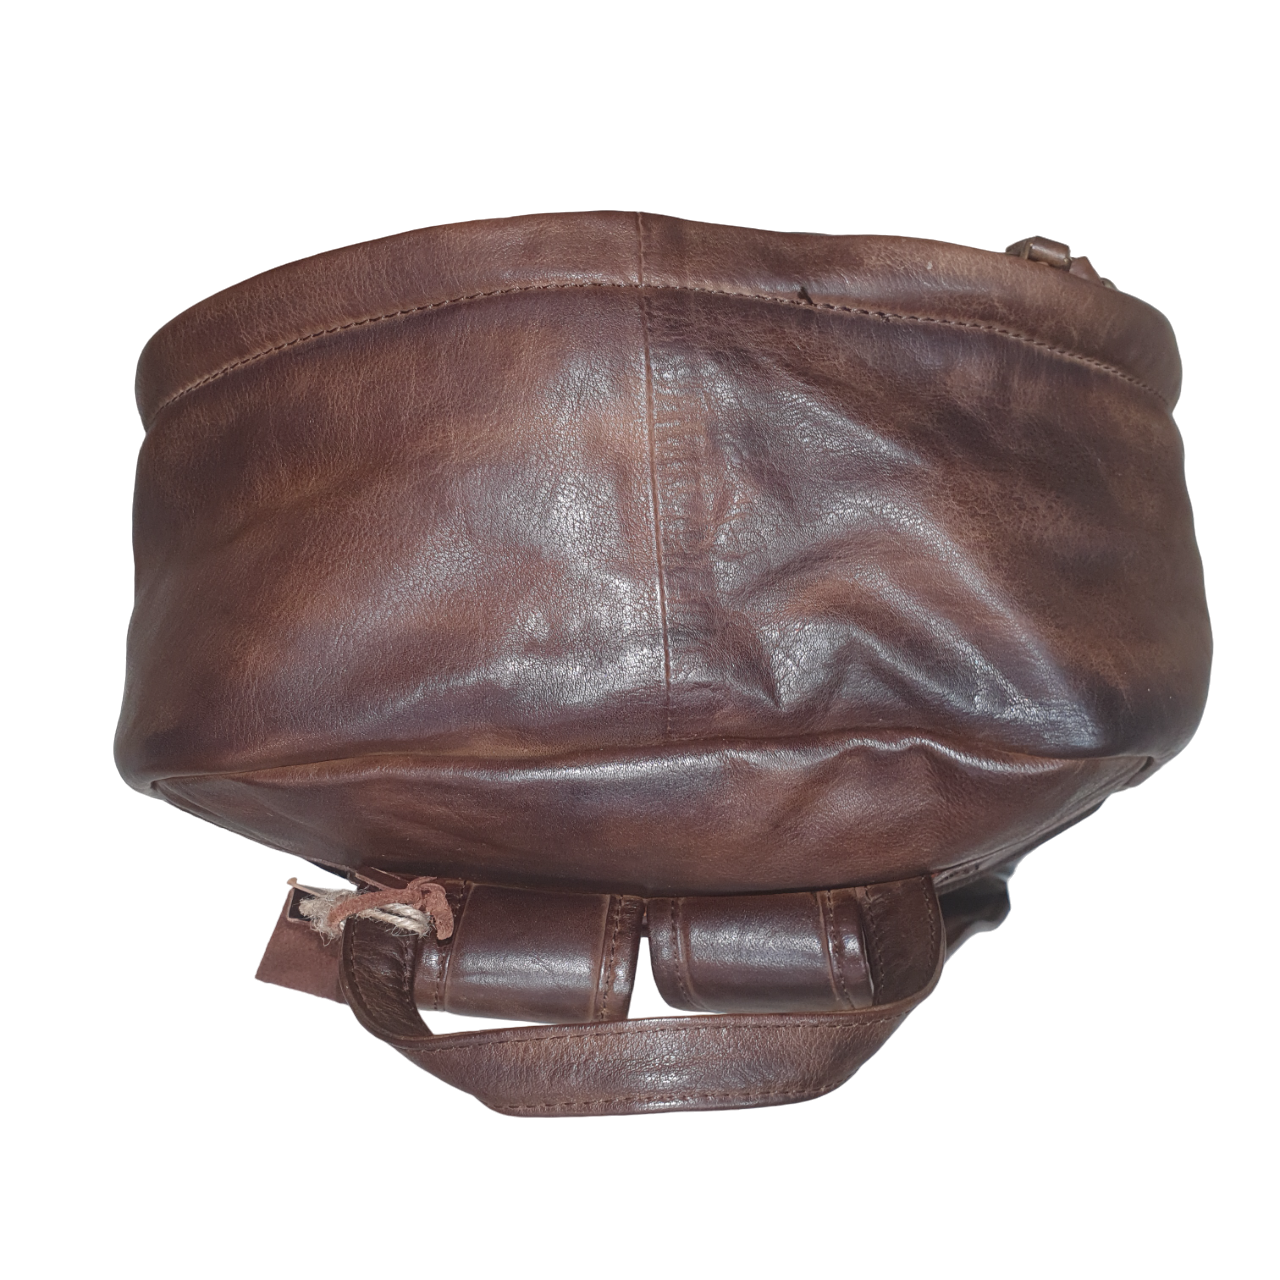 Rugged Hide - Leather Backpack RH-2623 Brussels